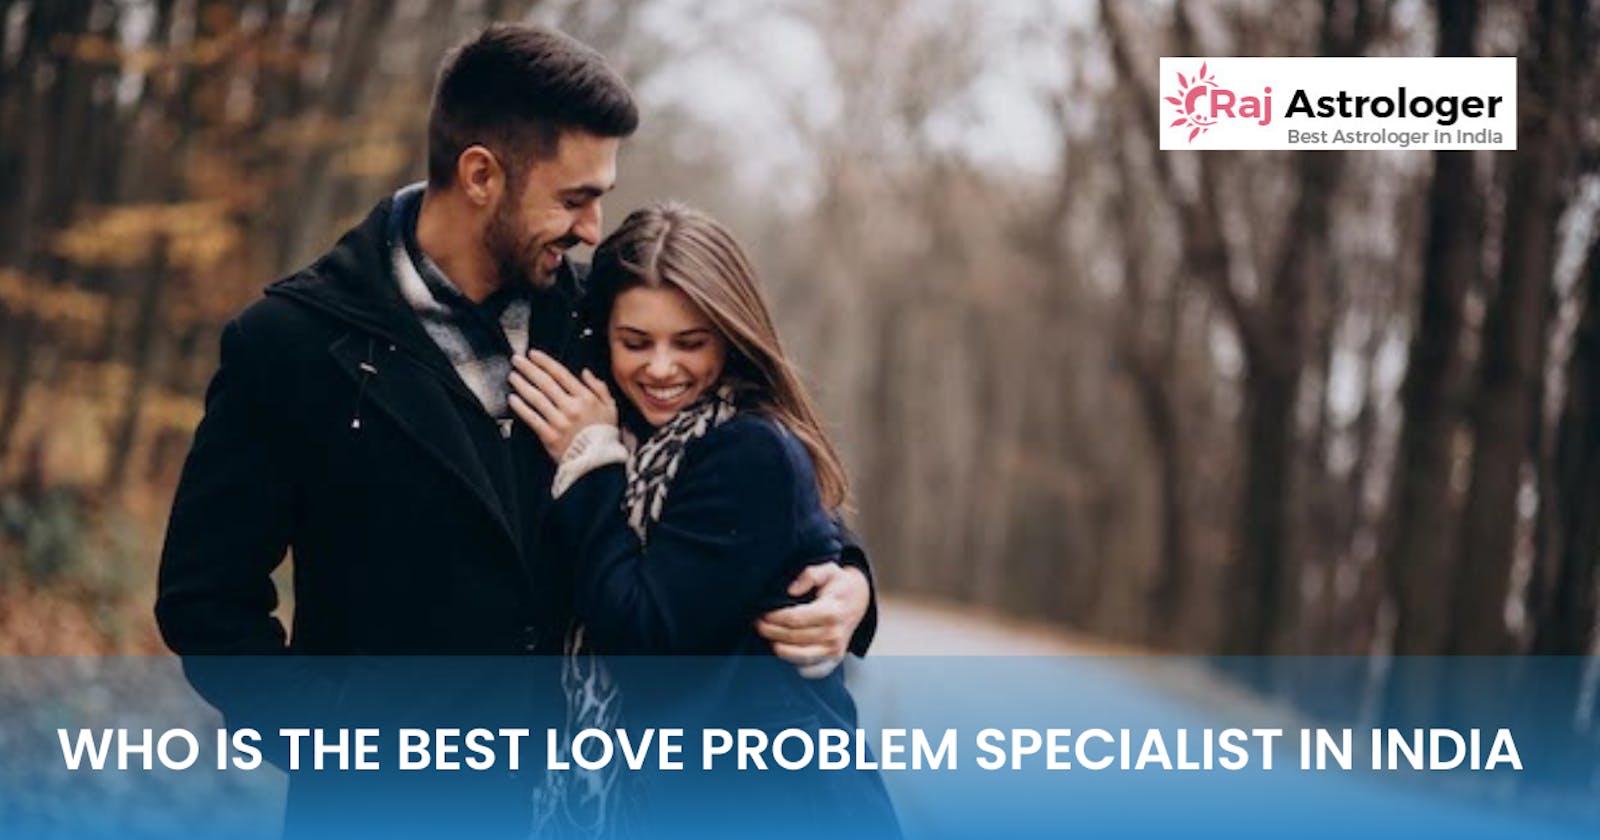 Who Is The Best Love Problem Specialist In India?